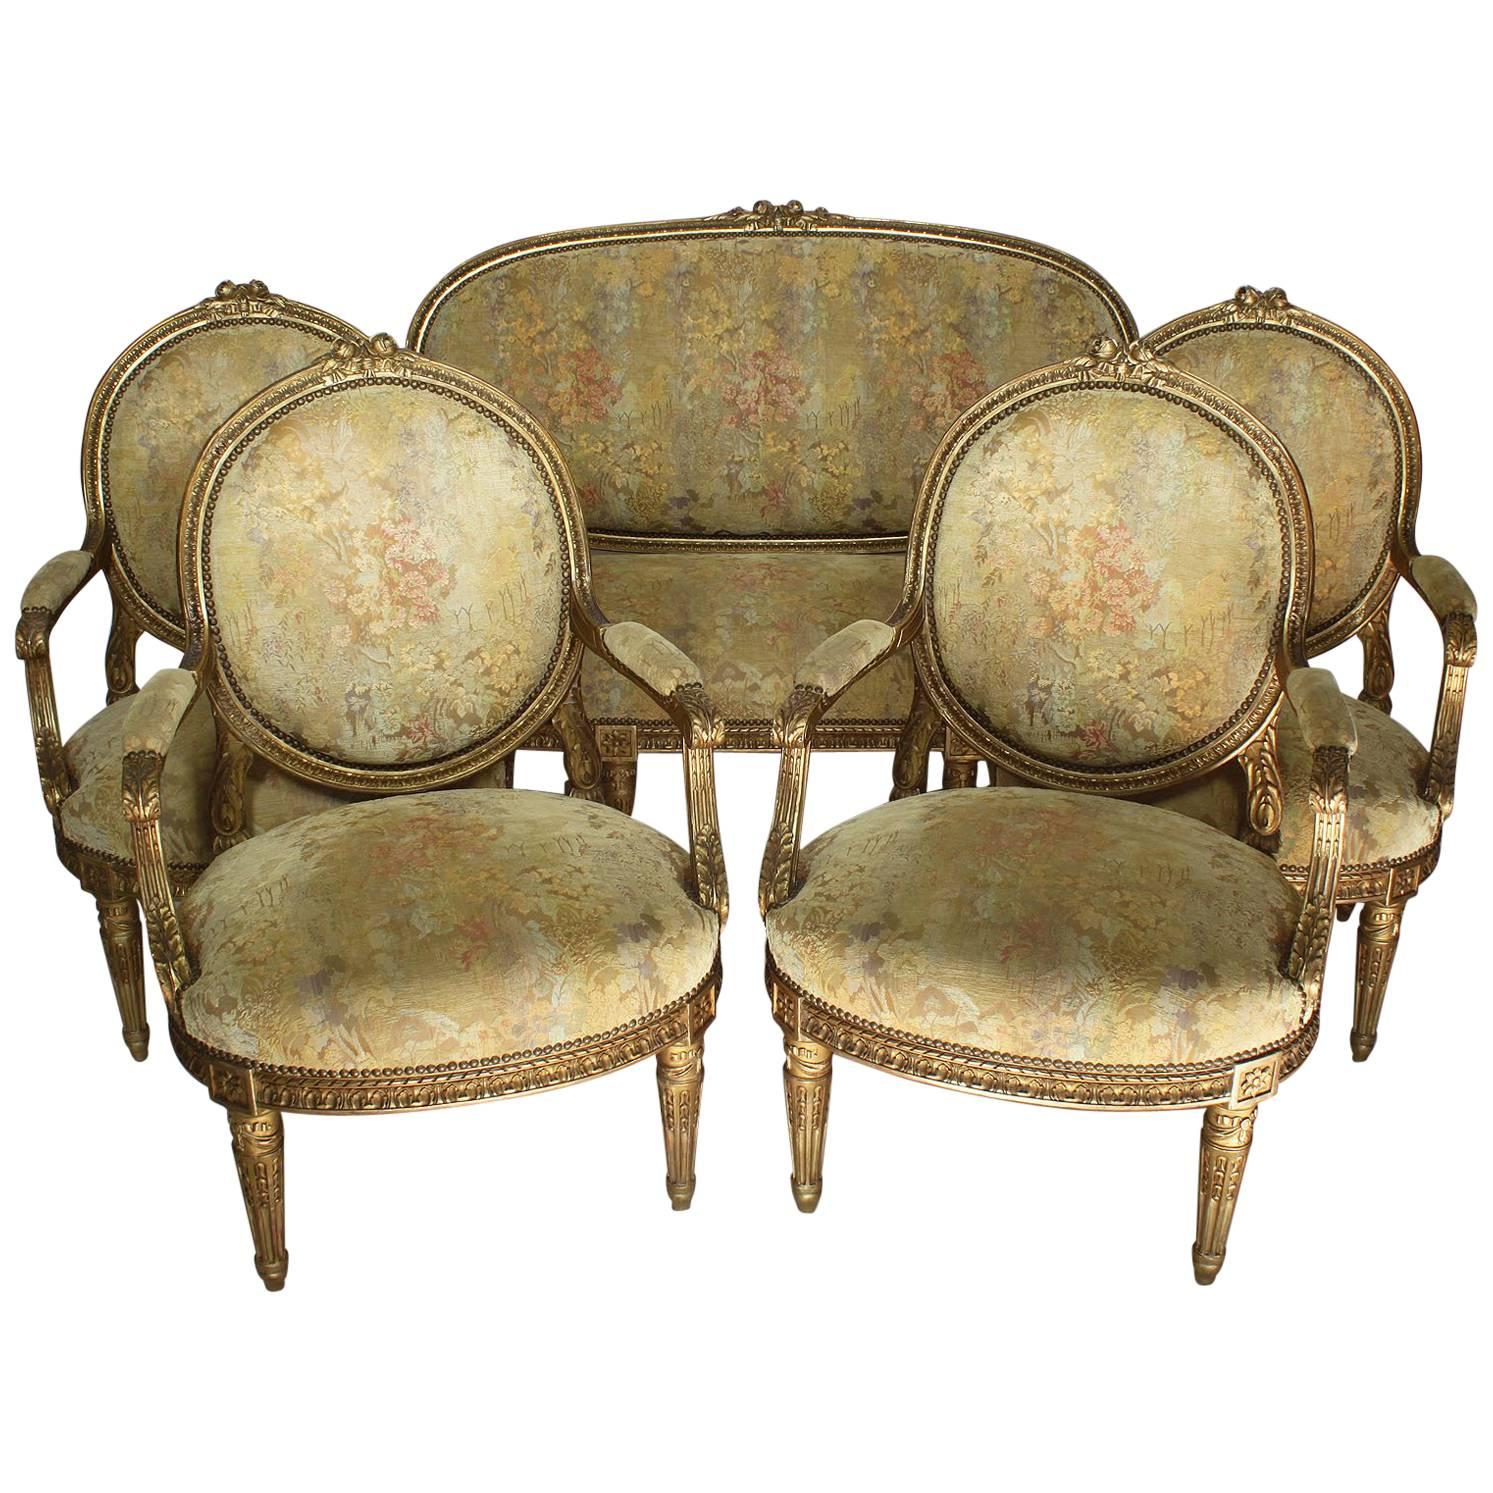 Fine French 19th Century Louis XVI Style Giltwood Carved Five-Piece Salon Suite